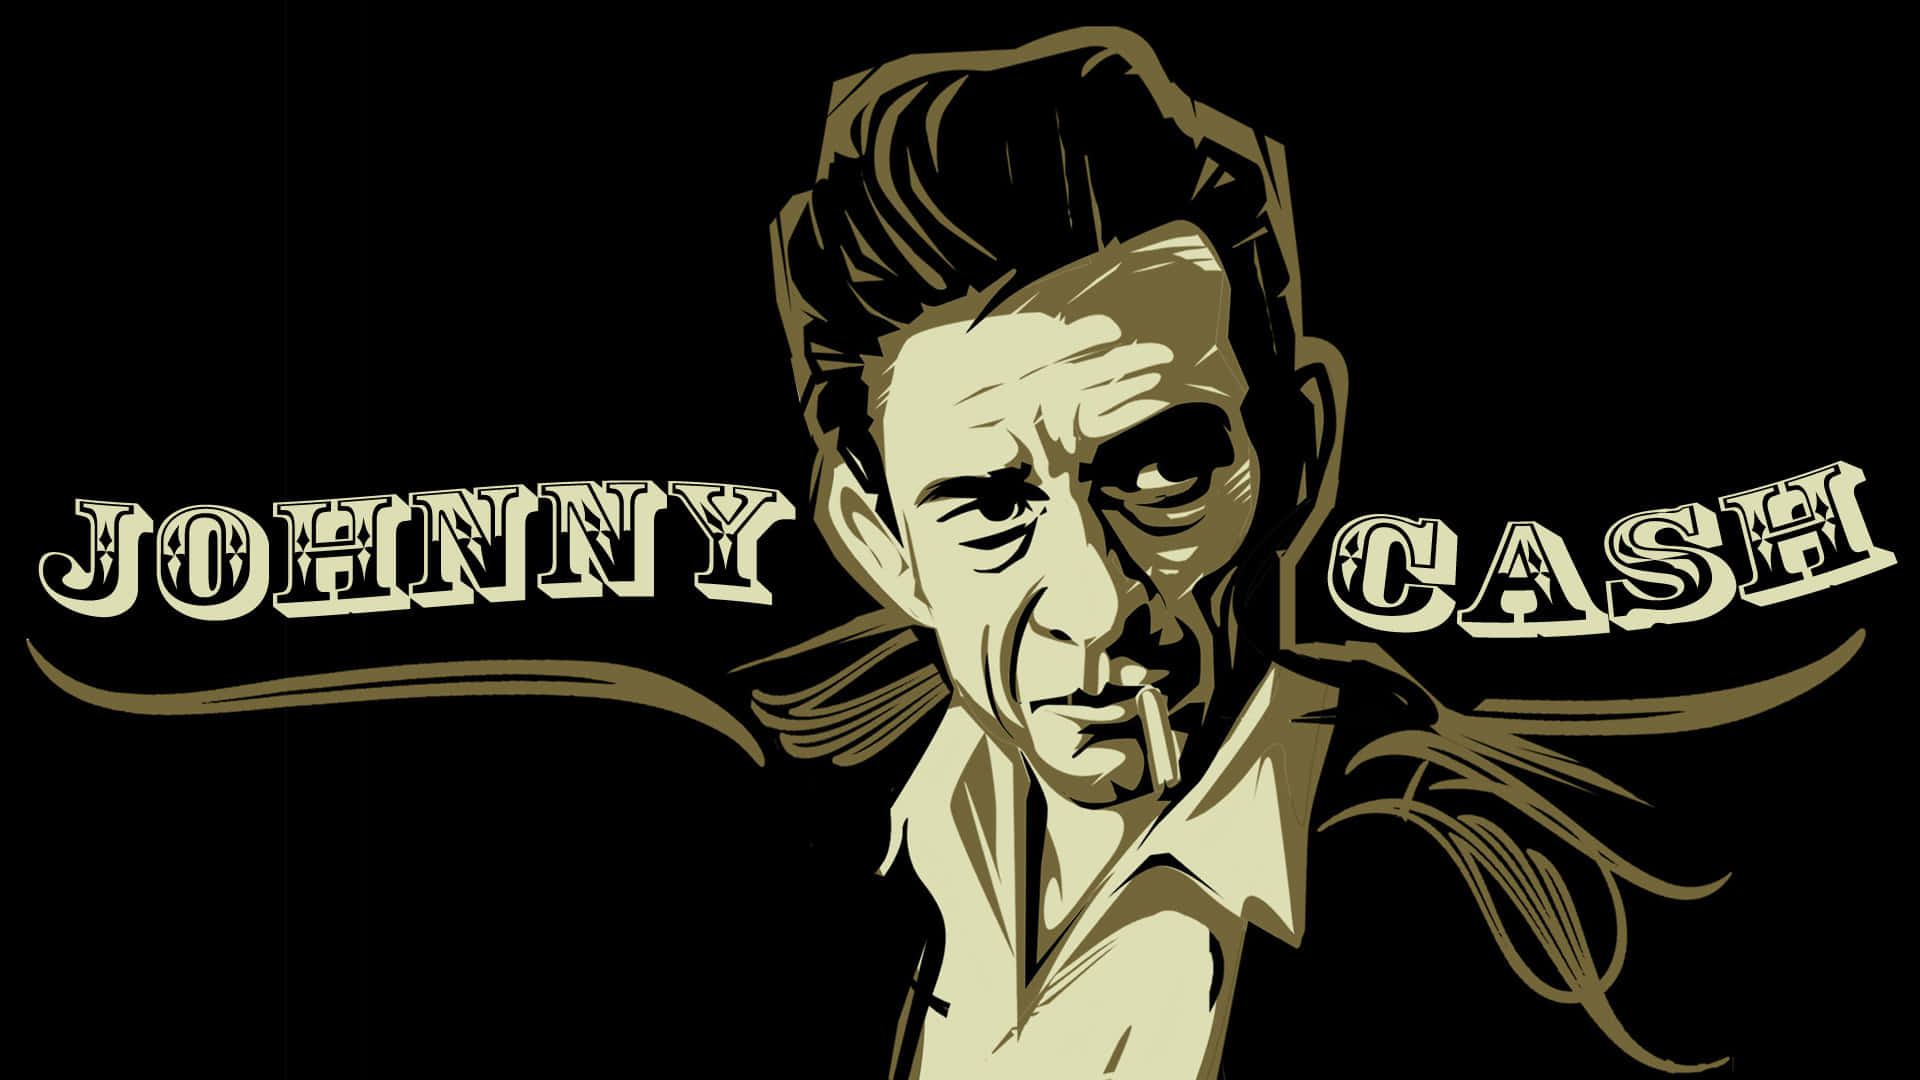 Johnny Cash Logo With A Black Background Wallpaper